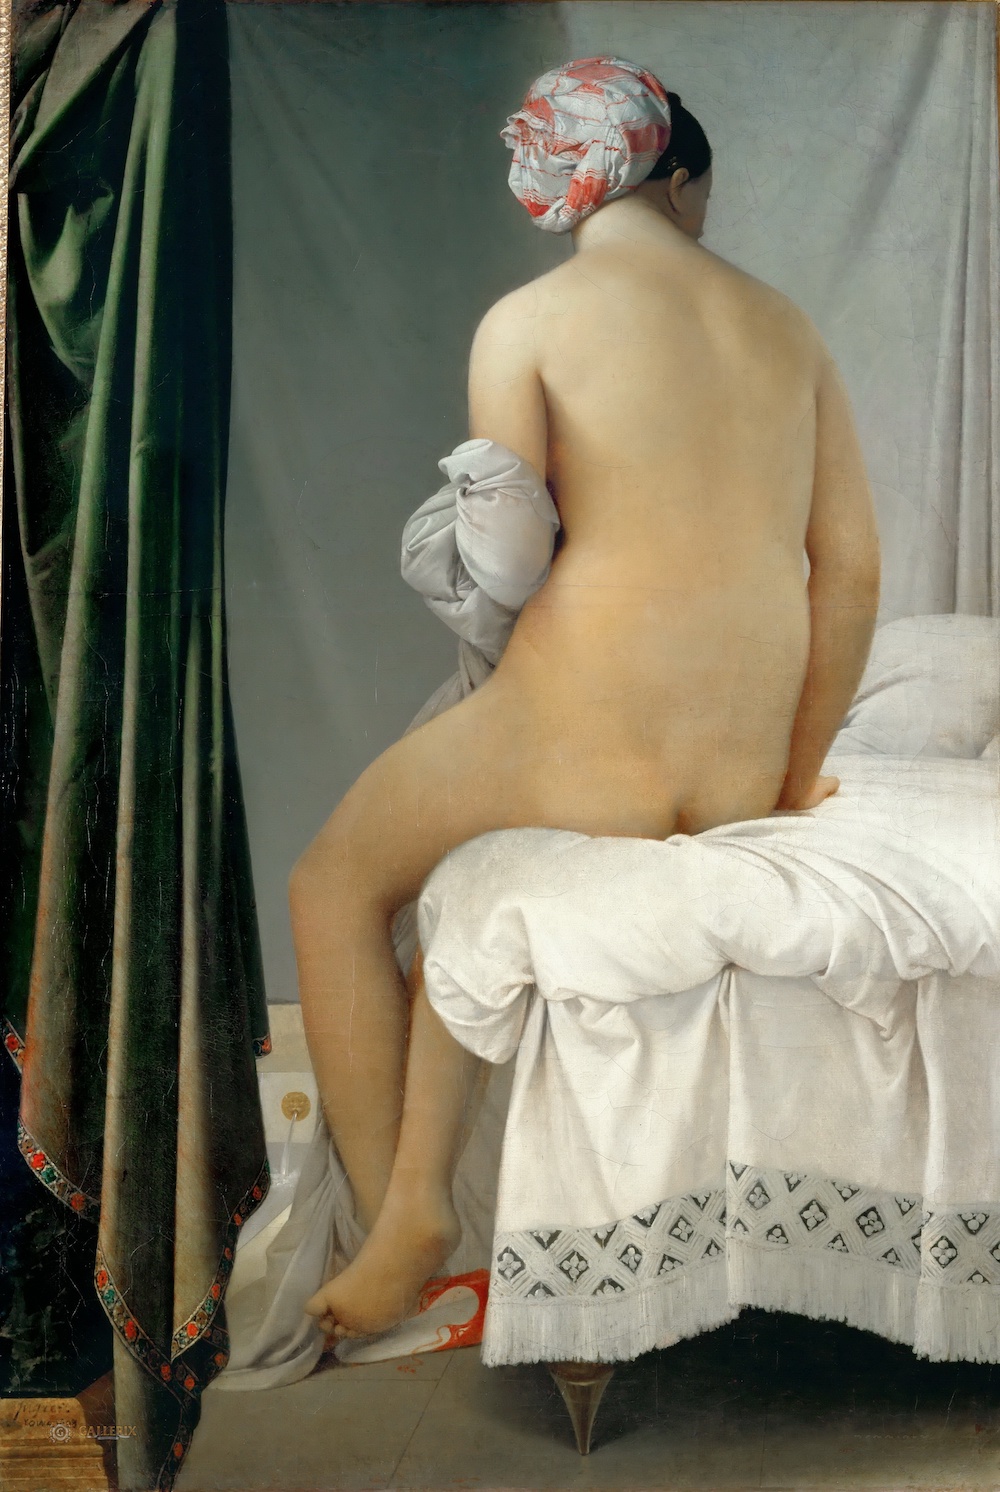 Jean Auguste-Dominique Ingres' The Bather of Valpinçon was the inspiration for Man Ray's Le Violon d'Ingres photograph